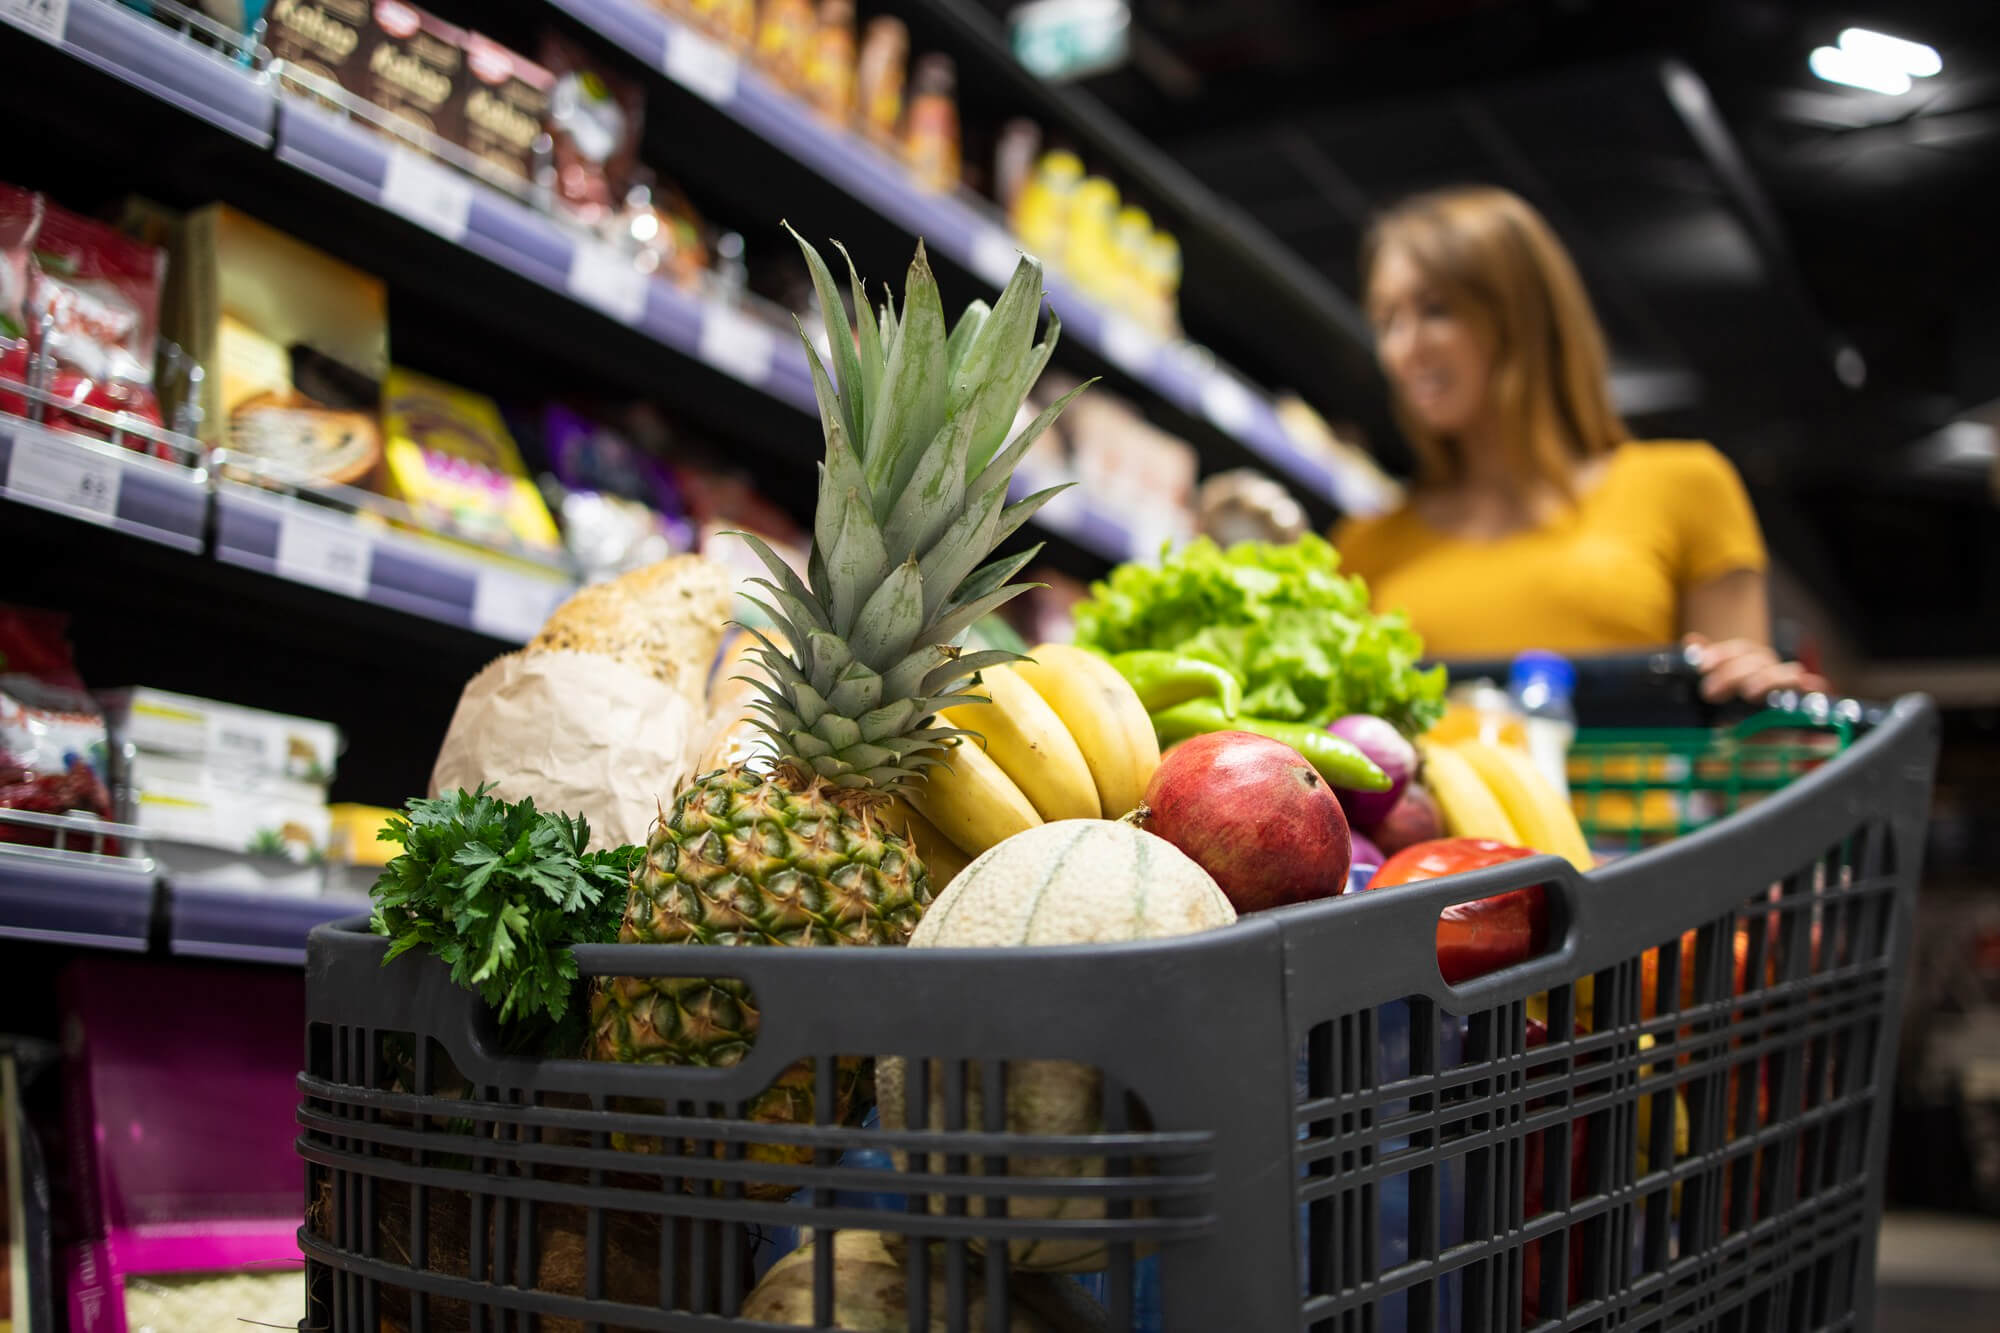 close-up-view-shopping-cart-overloaded-with-food-while-background-female-person-choosing-products